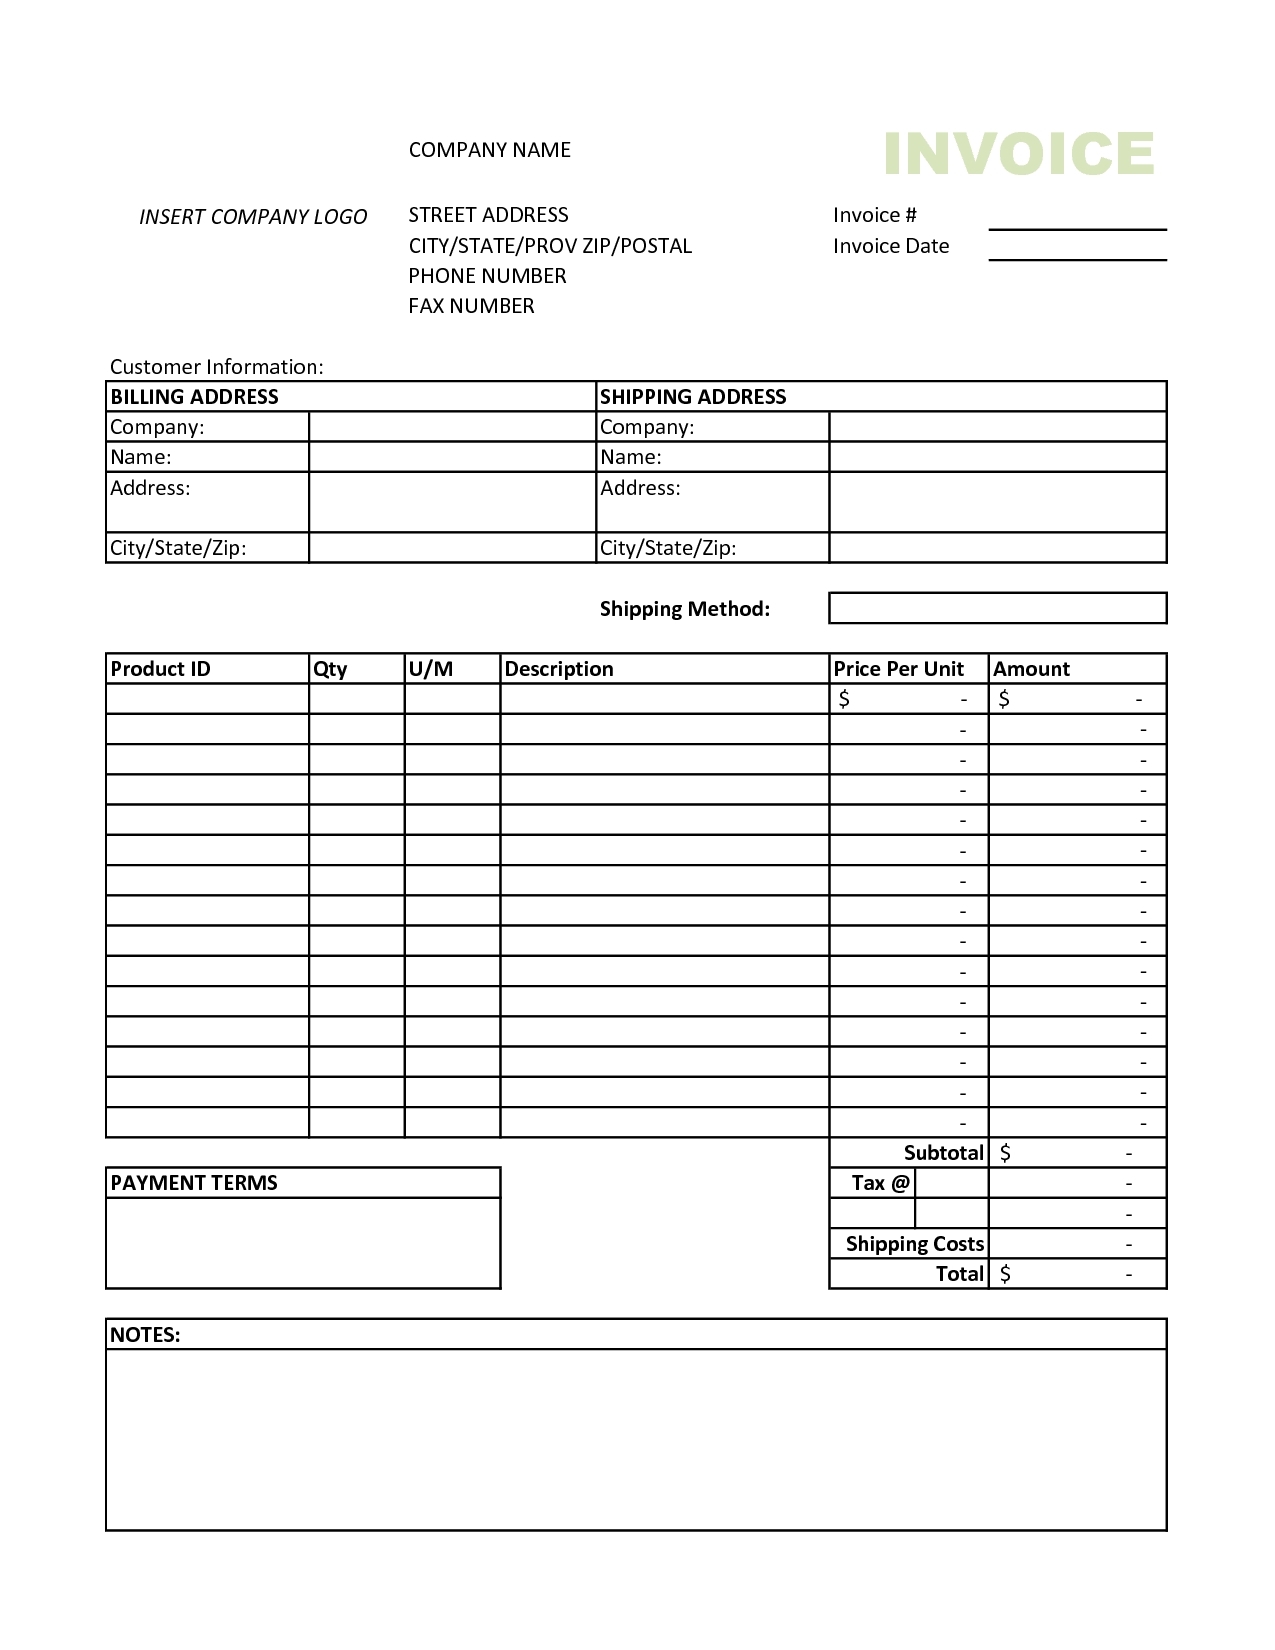 Fresh and Modern Invoice Template Excel 2010 invoice example